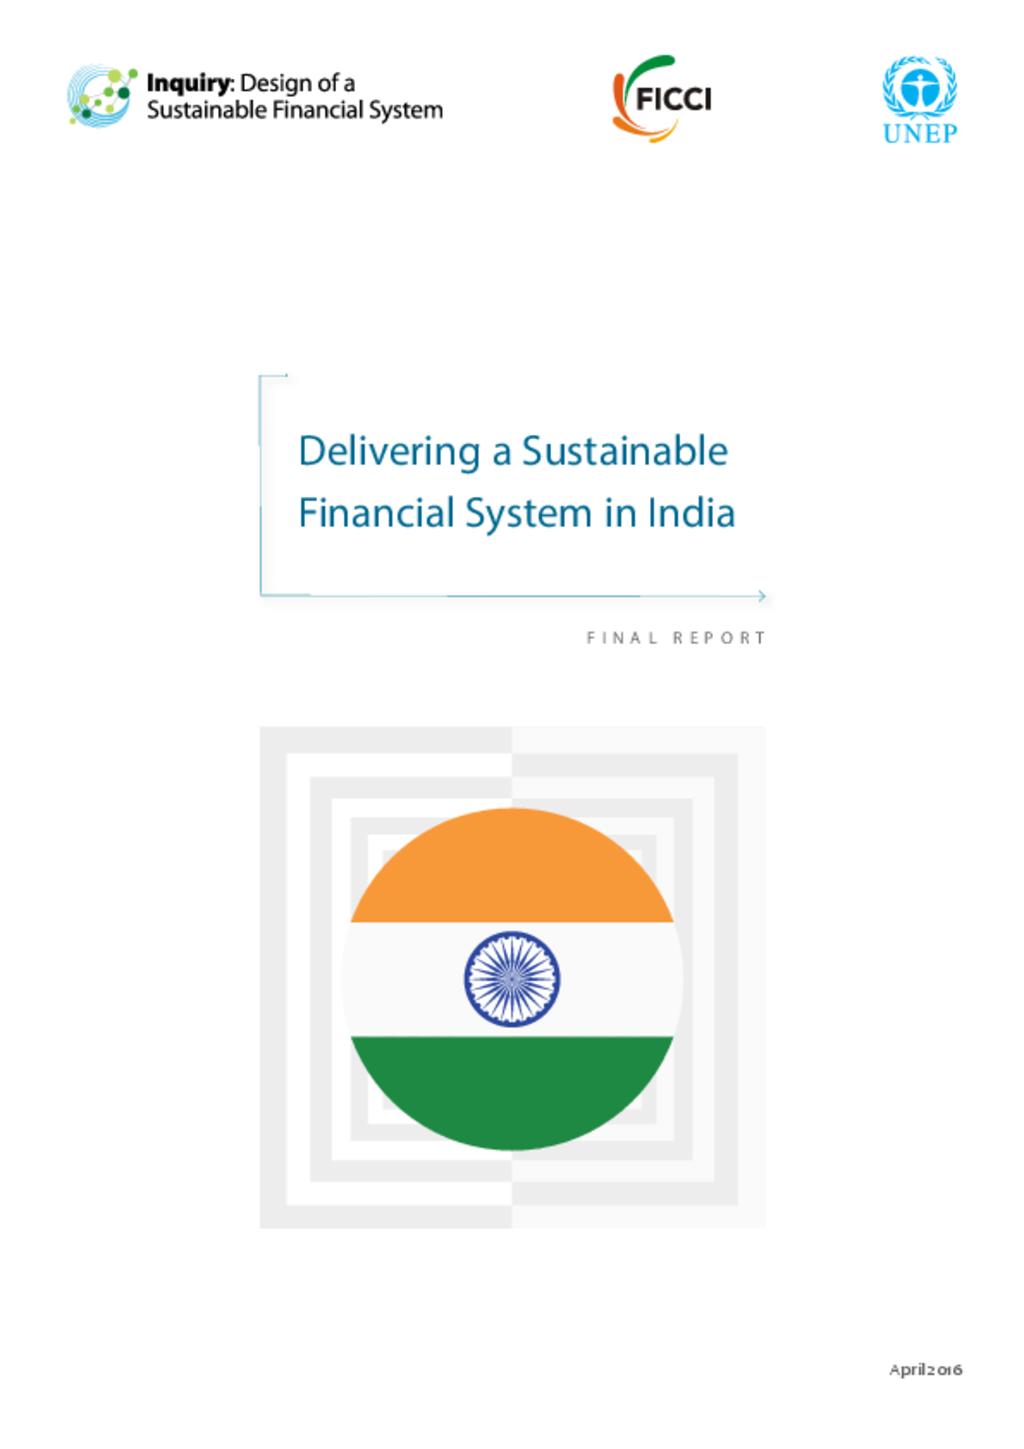 Delivering a Sustainable Financial System in India